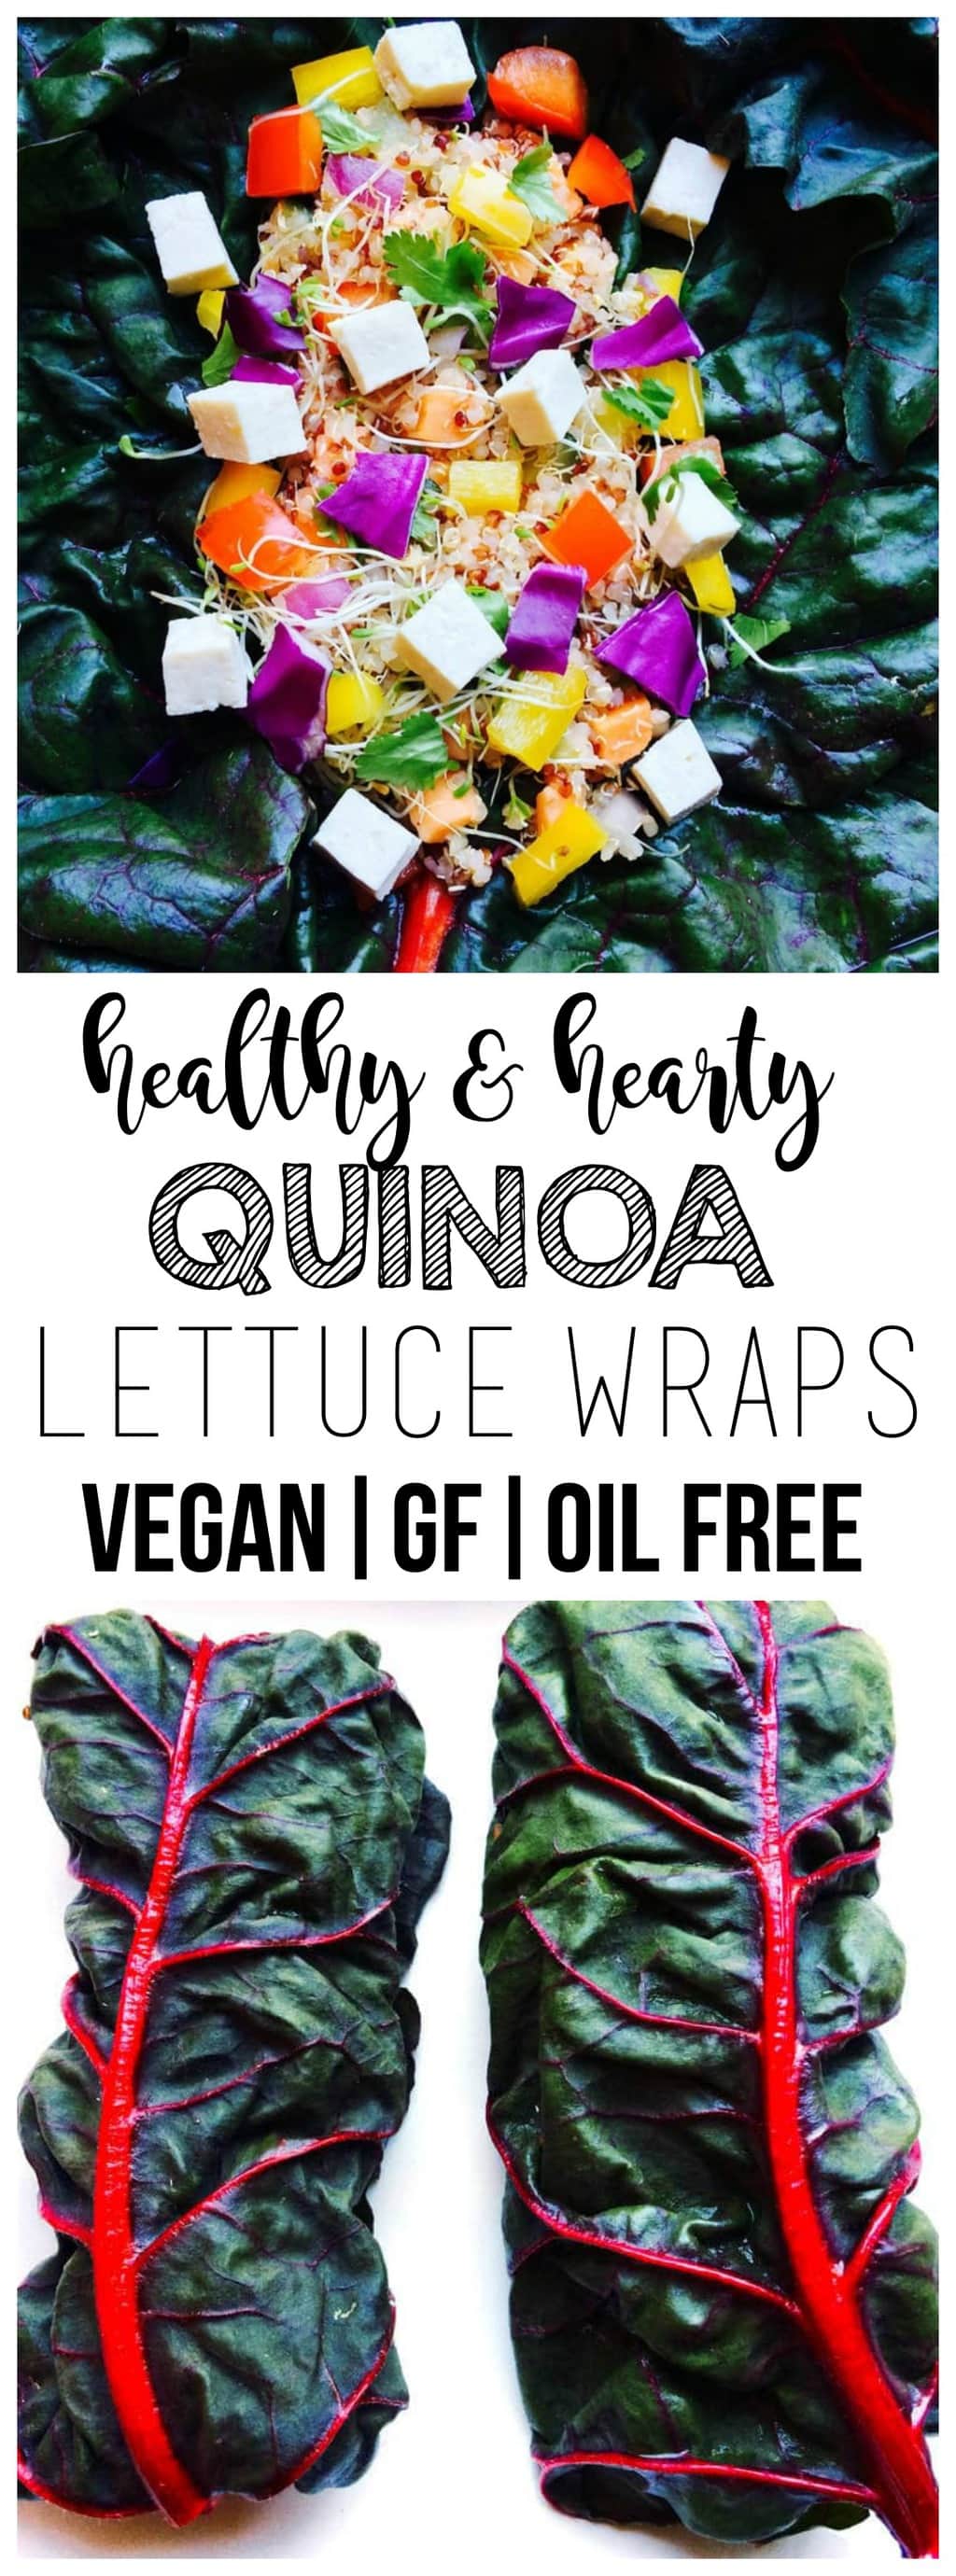 These Hearty Quinoa Lettuce Wraps are the perfect filling and delicious vegan lunch! They're also gluten-free, high-protein, grain-free, oil-free, and super easy to throw together.